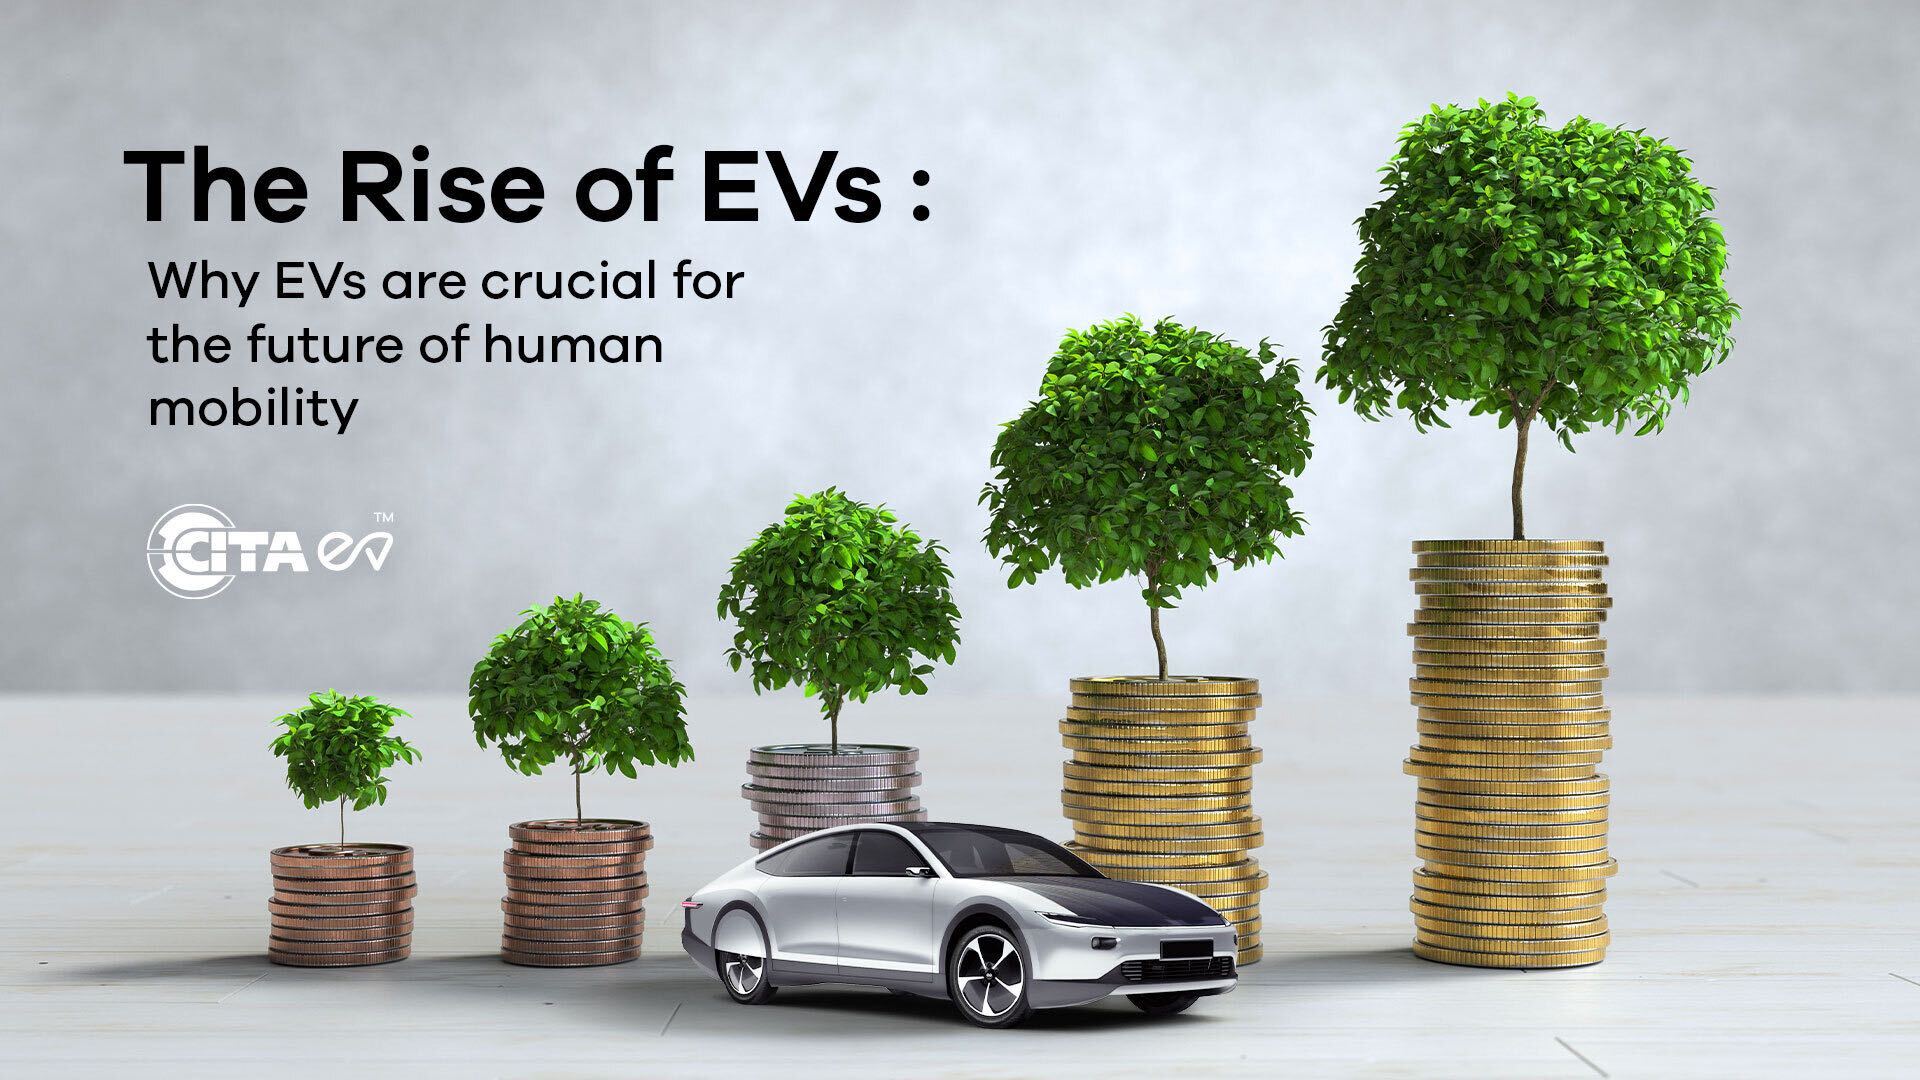 Why EVs are crucial for the future of human mobility - Cita ev blog